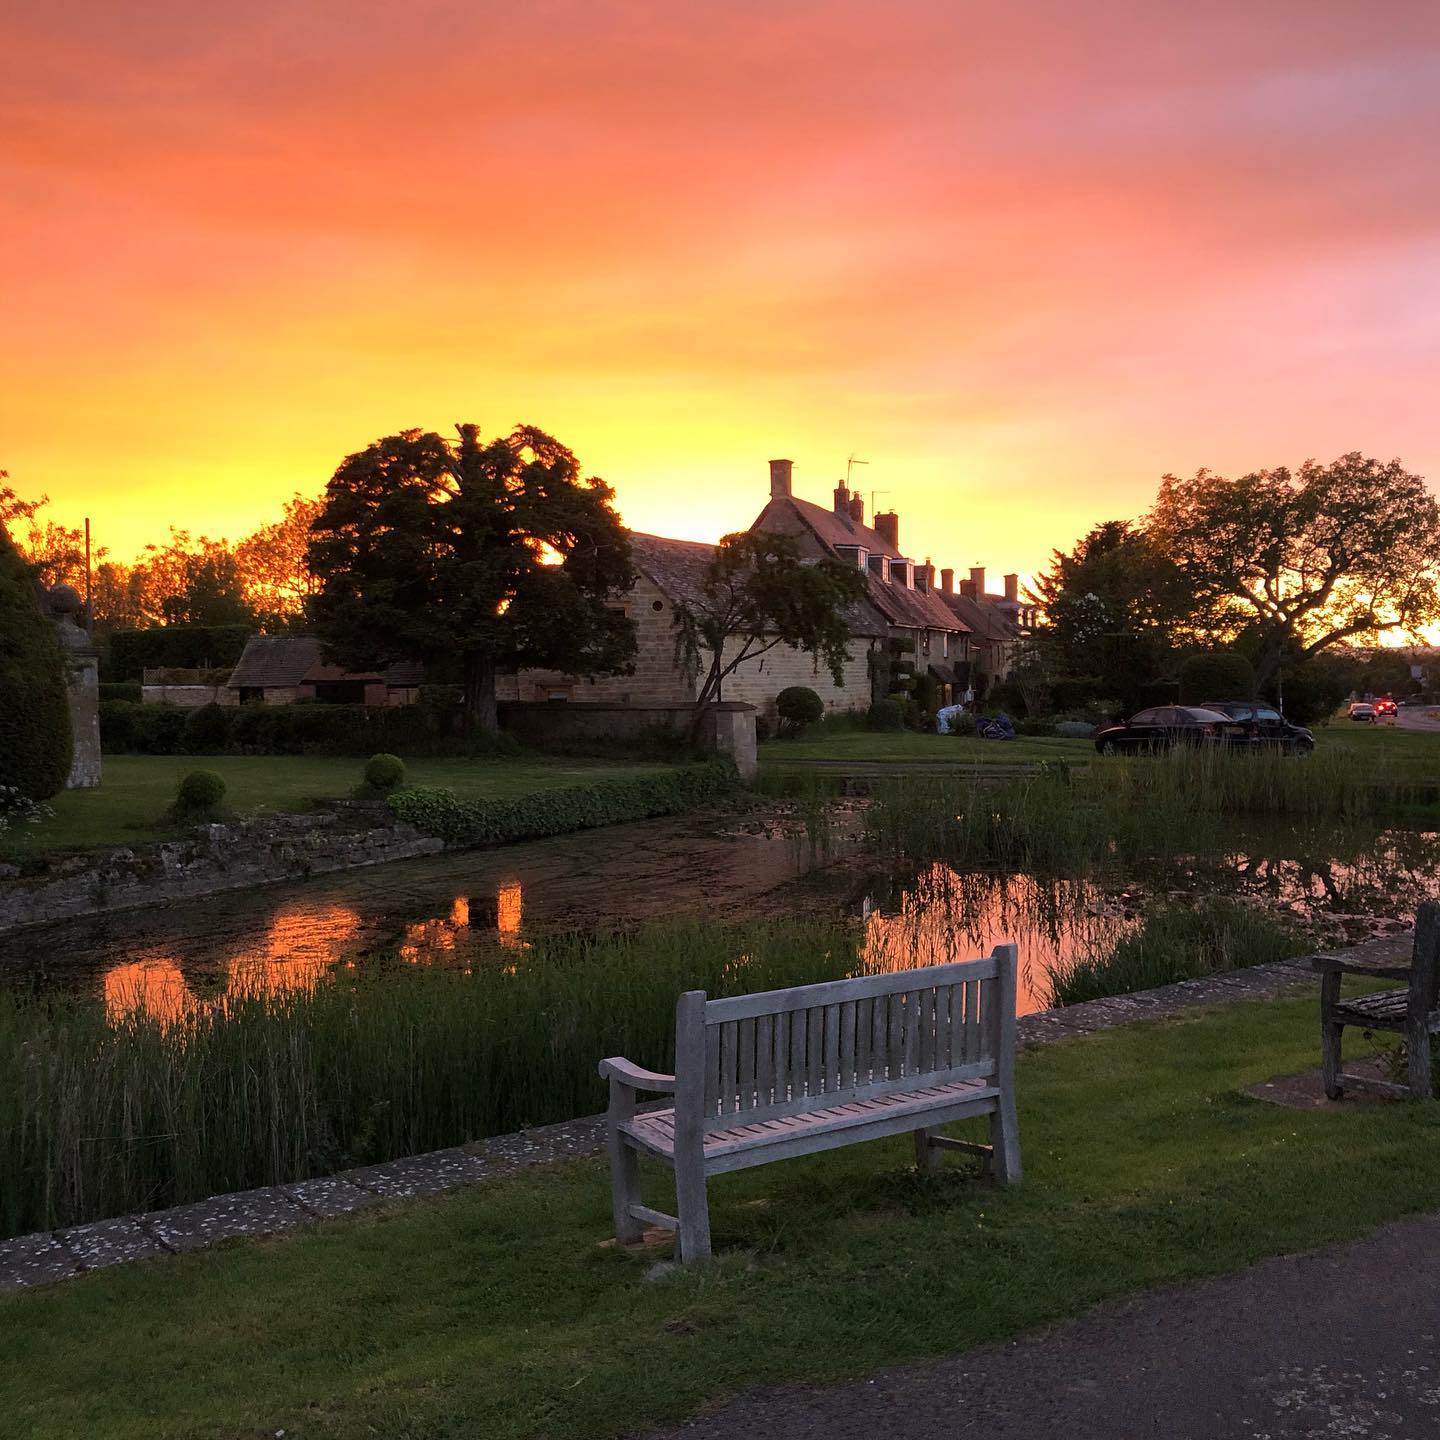 Willersey pond at sunset